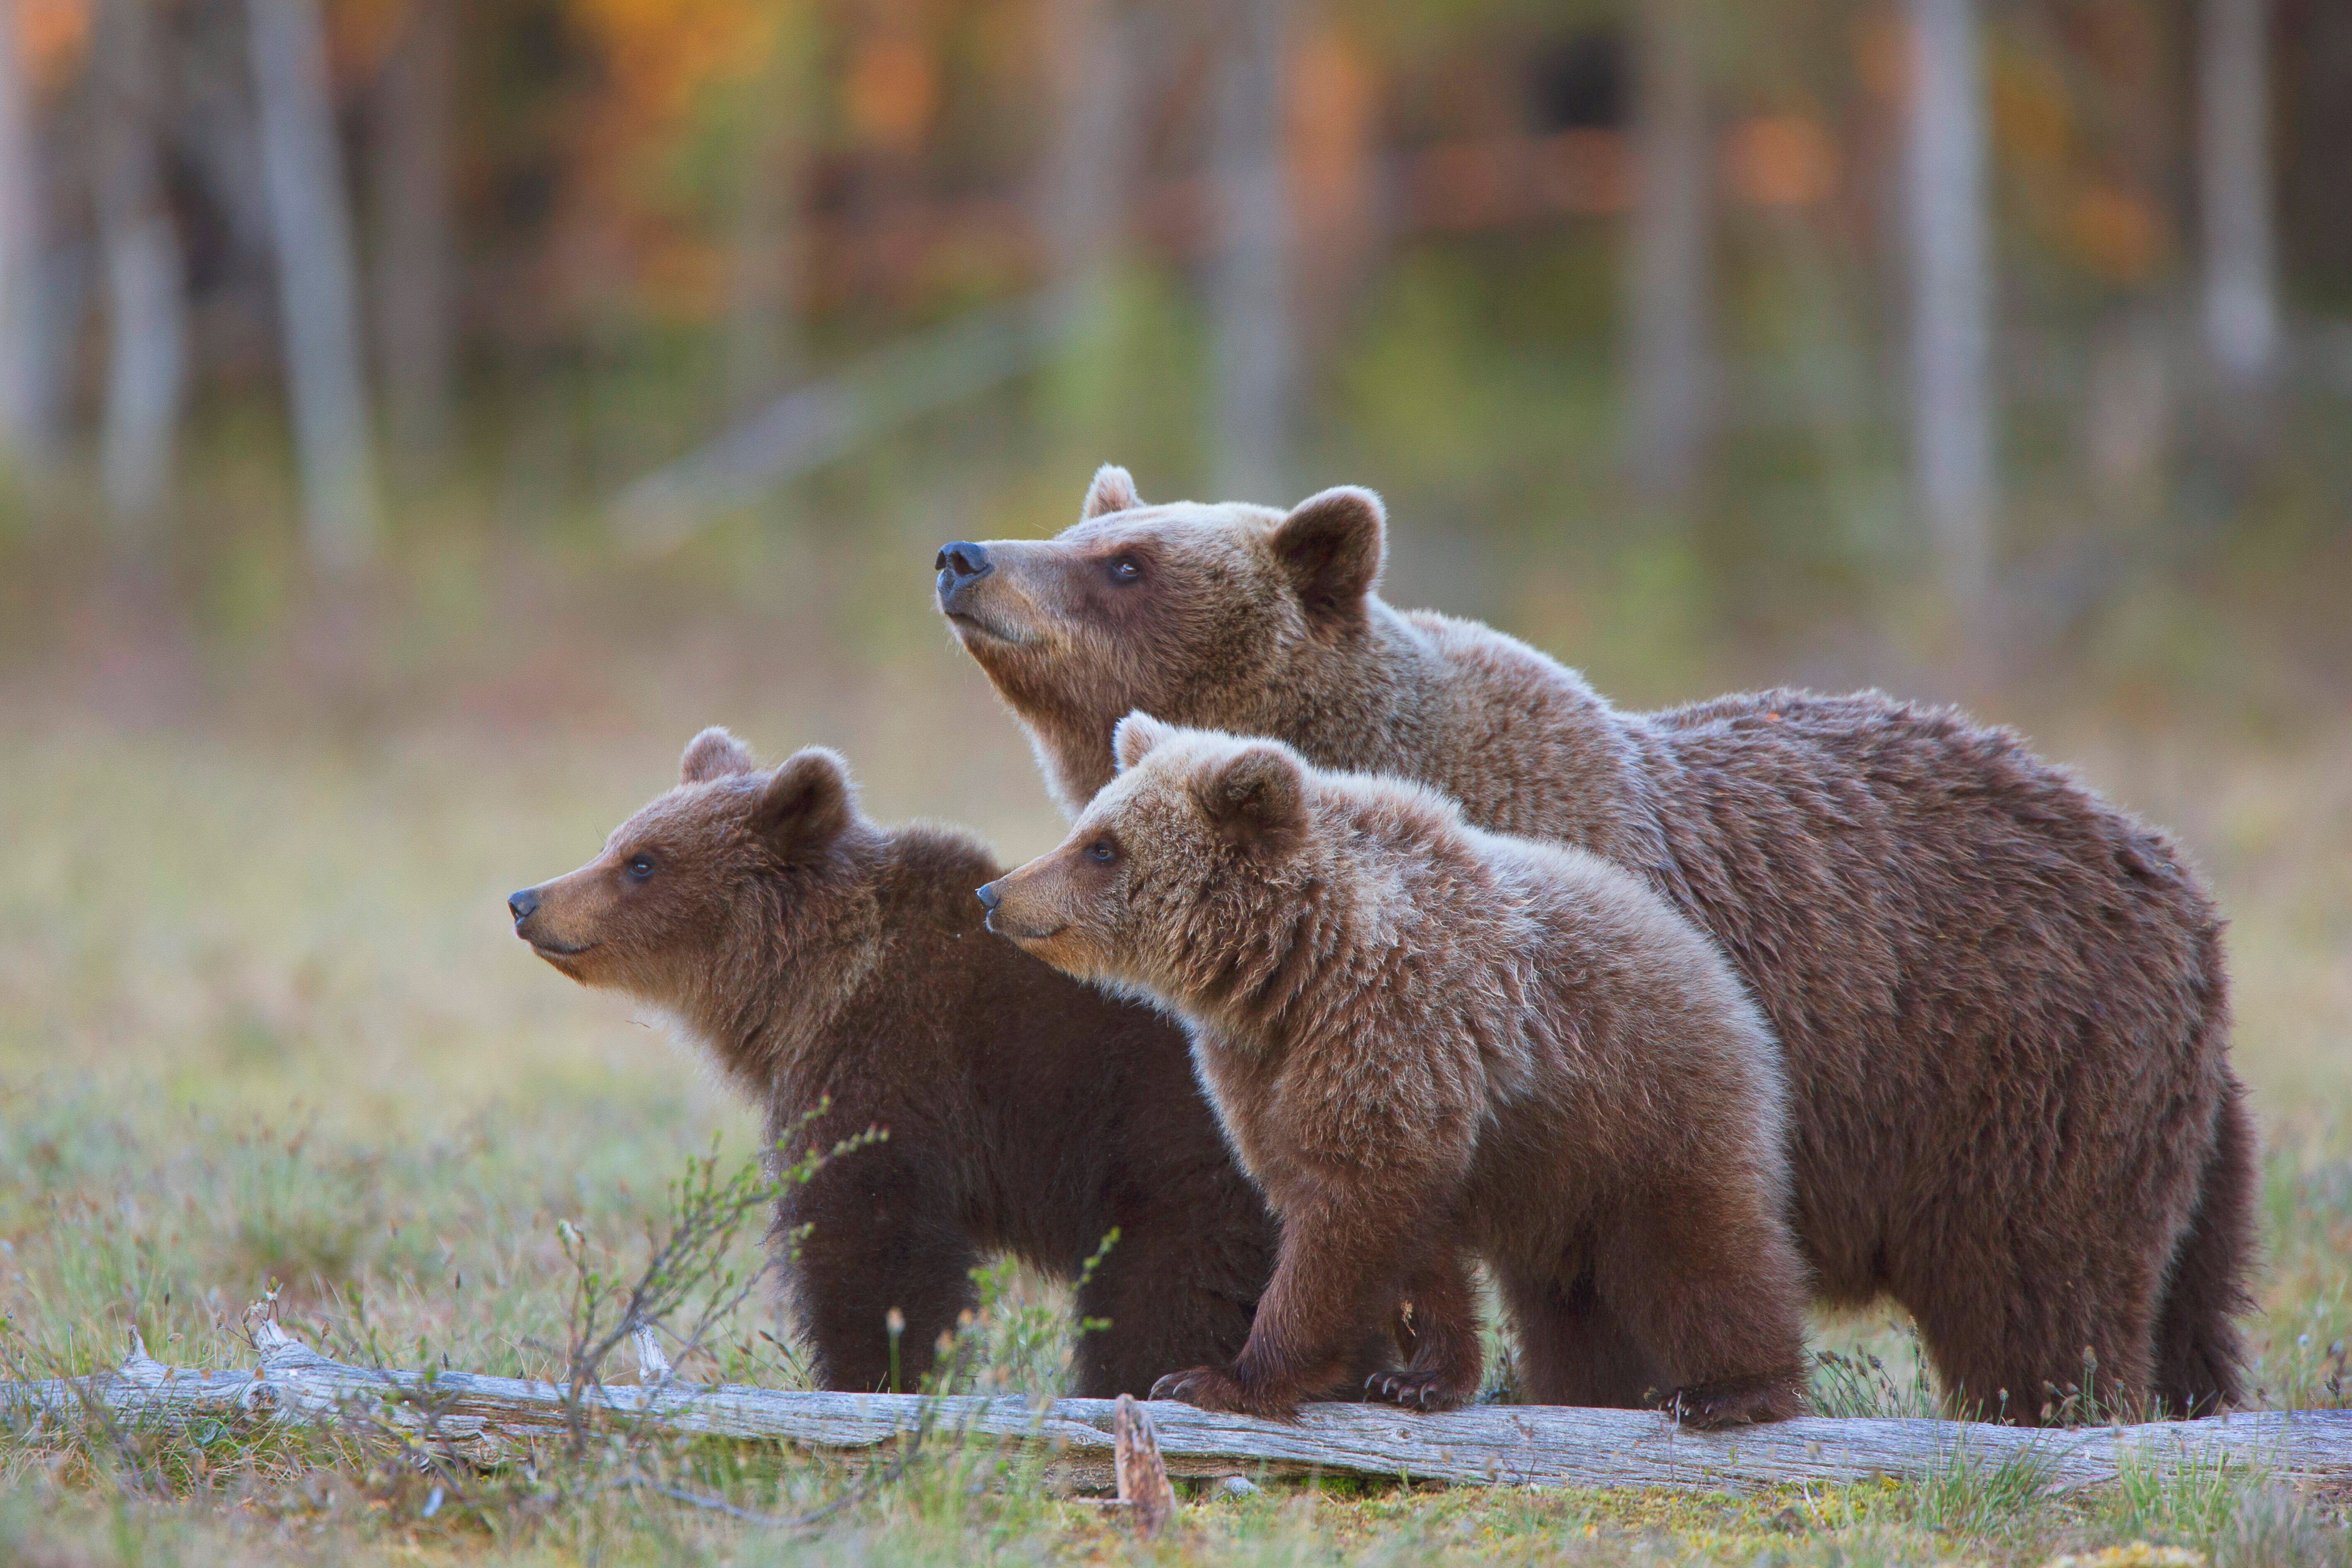 According to the report, Finland’s bear population decreased by 20 percent from a year ago